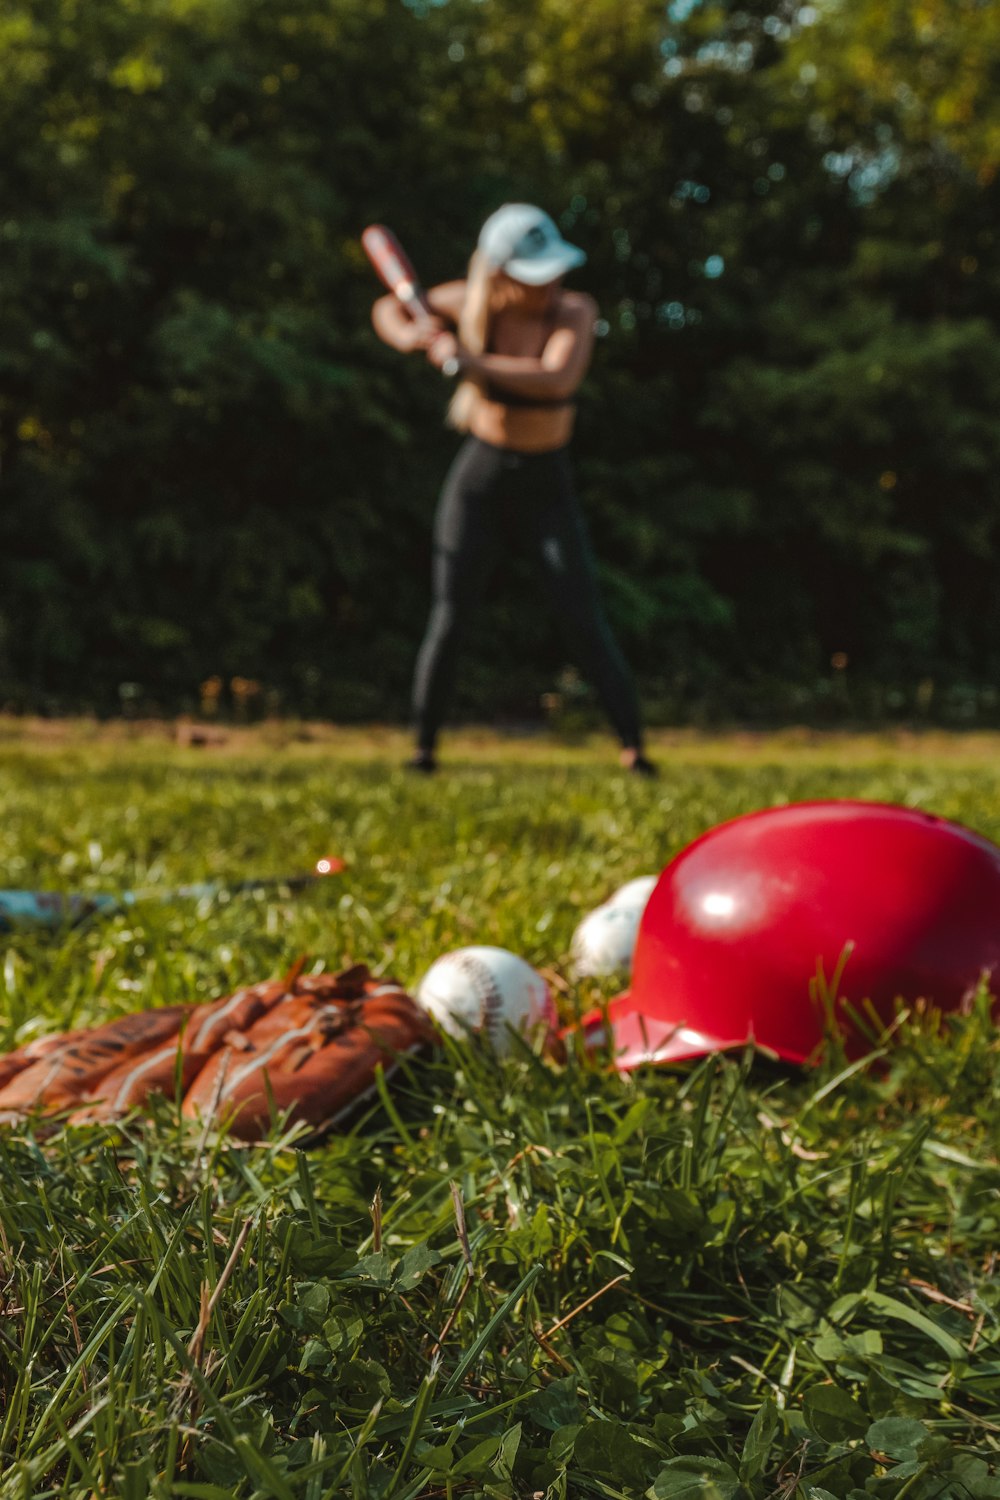 a woman is playing baseball in a field